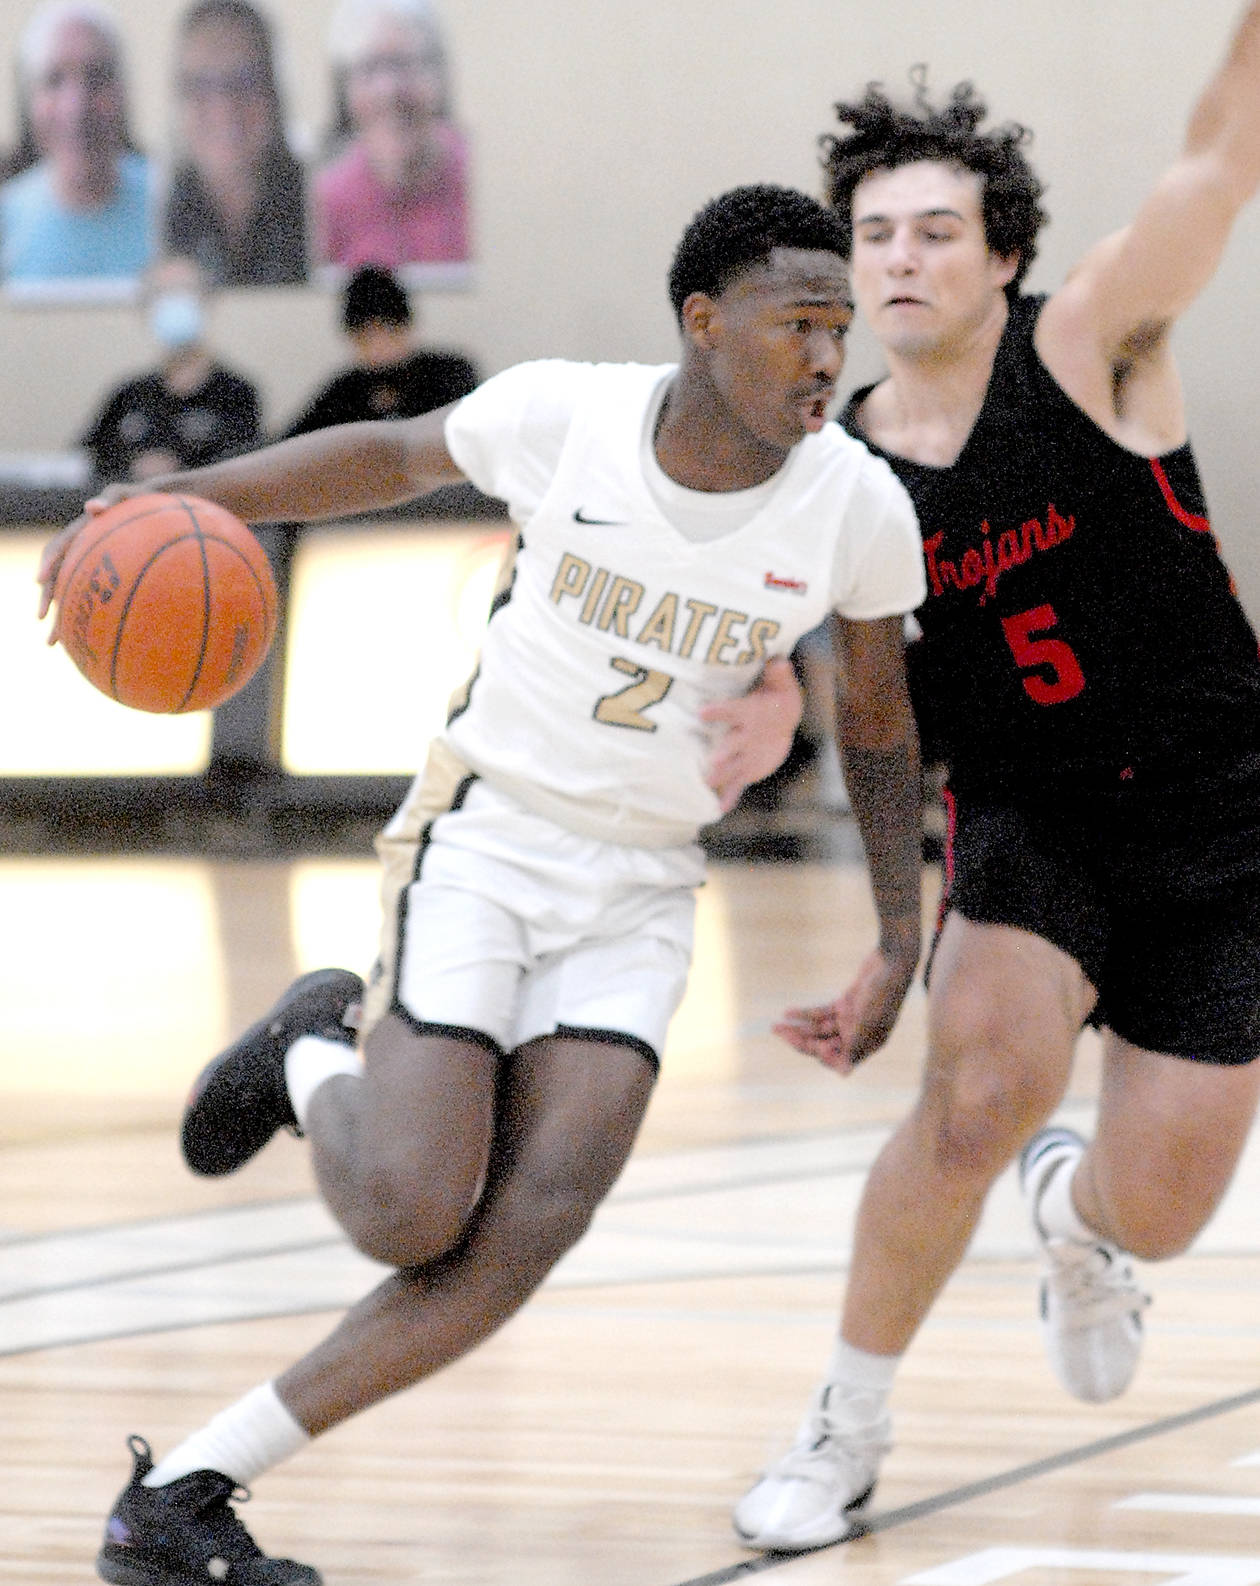 Keith Thorpe/Peninsula Daily News
Peninsula's Marcus Rodgers, left, drives past Everett's Brayden Quantrille during Friday afternoon's game at Peninsula College.